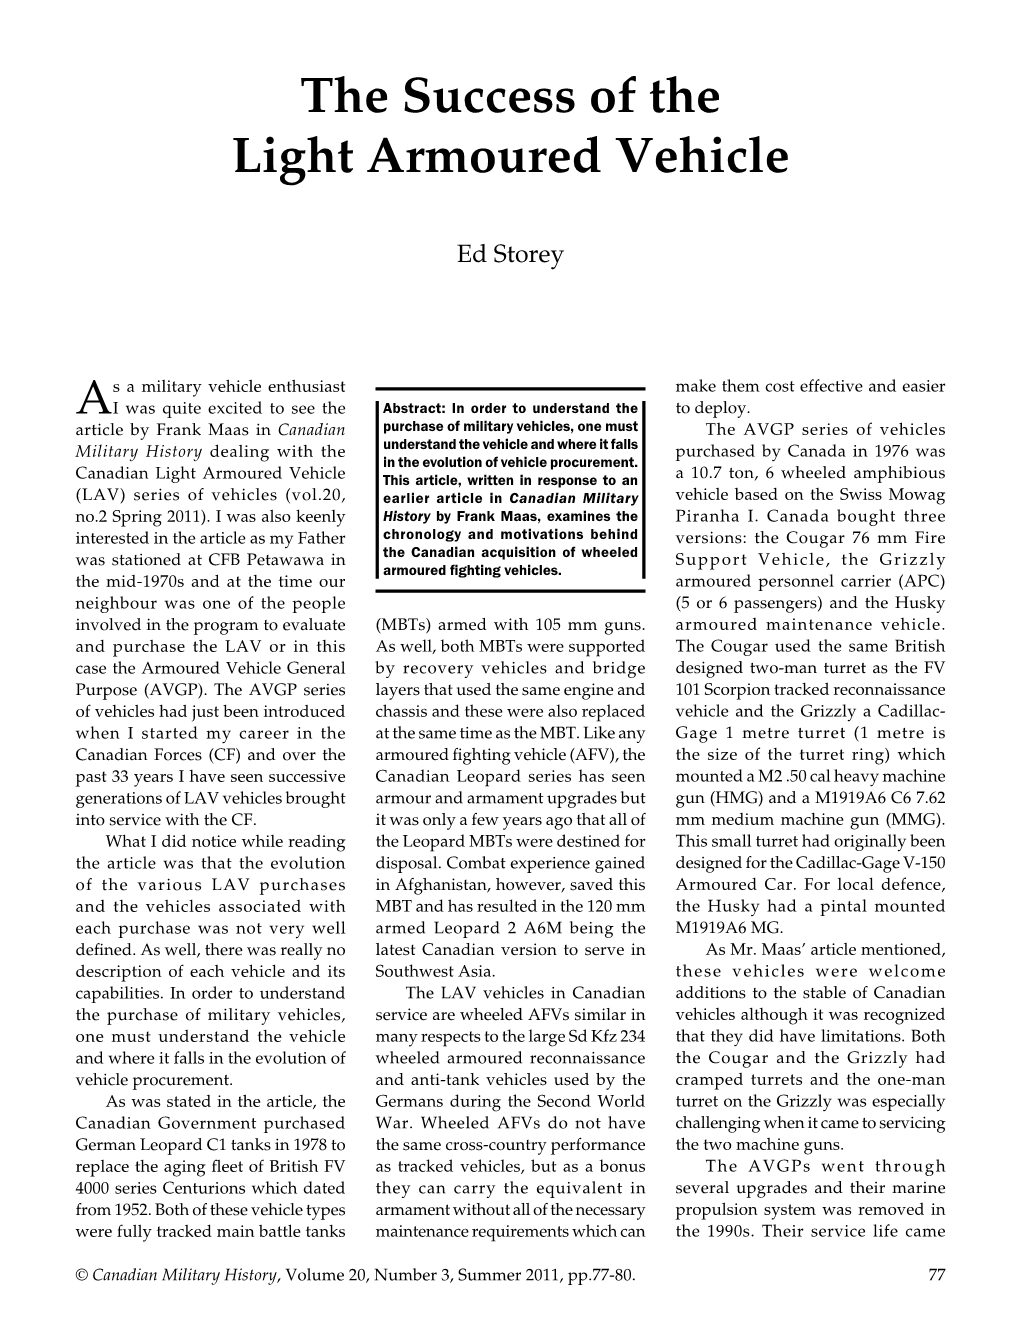 The Success of the Light Armoured Vehicle